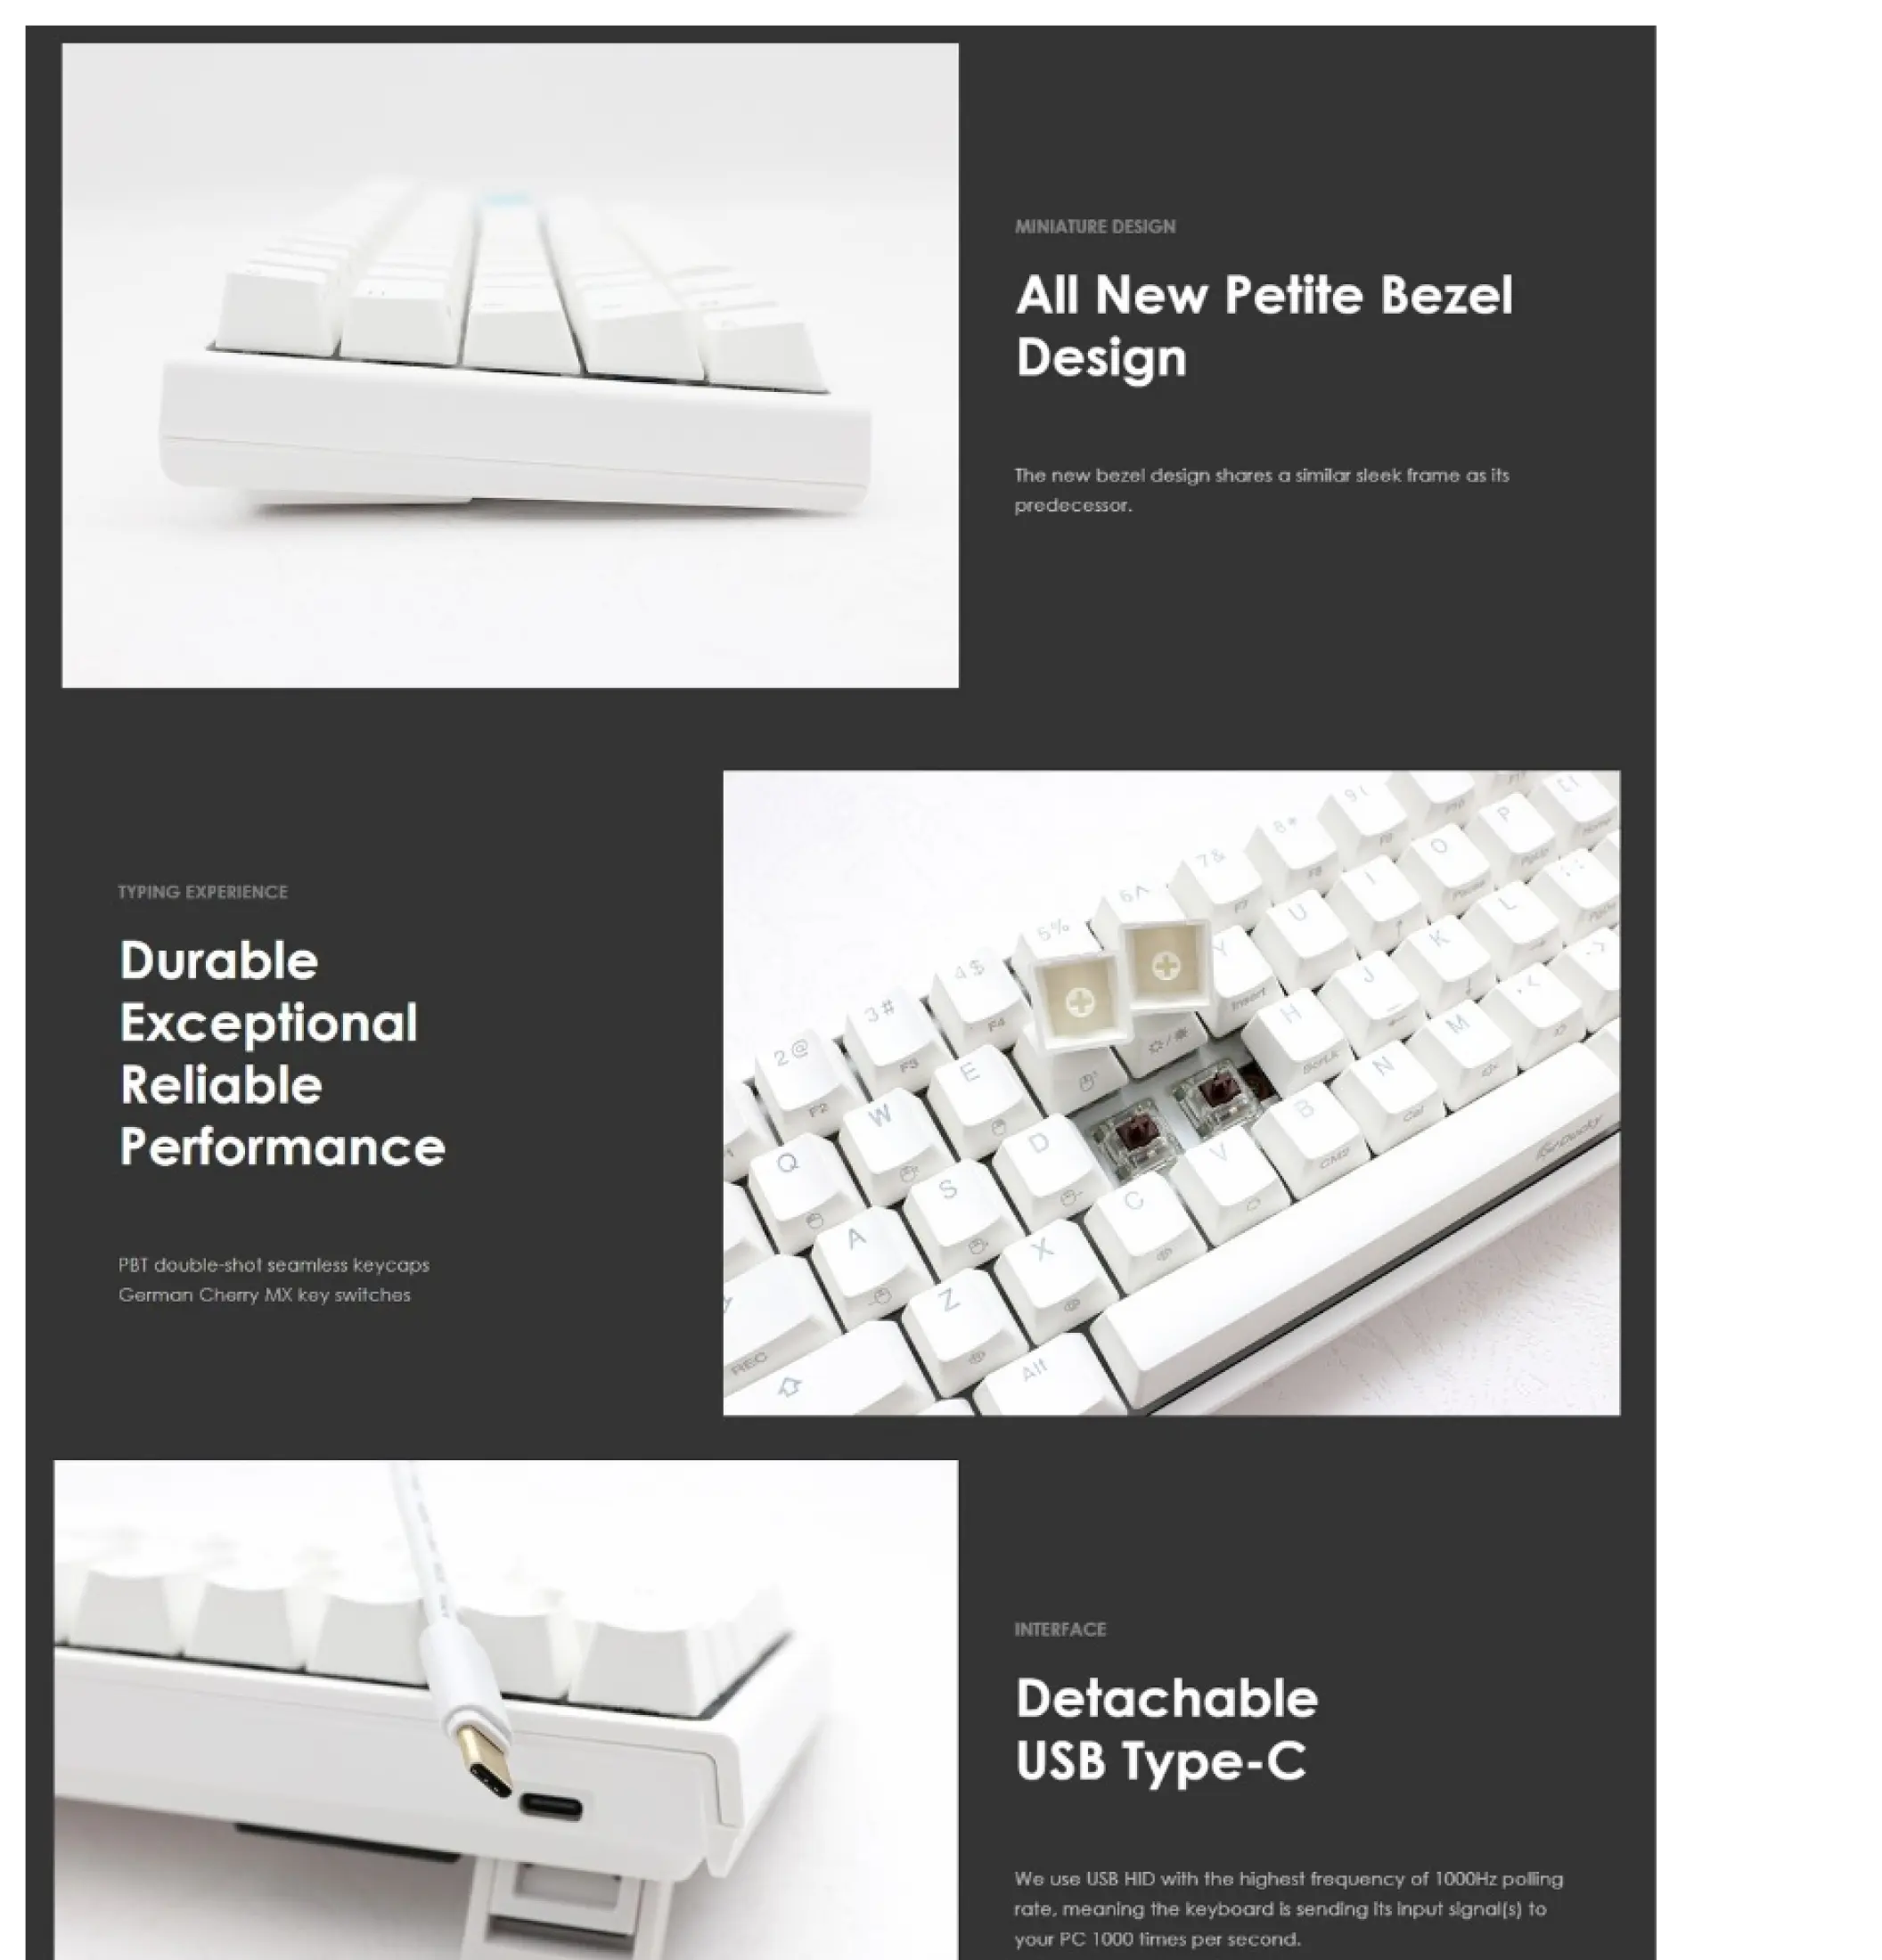 Ducky One 2 Mini Rgb White Edition Mechanical Keyboard Cherry Kailh Switches No Firmware Update Required Random Colored Additional Keycaps Lazada Singapore